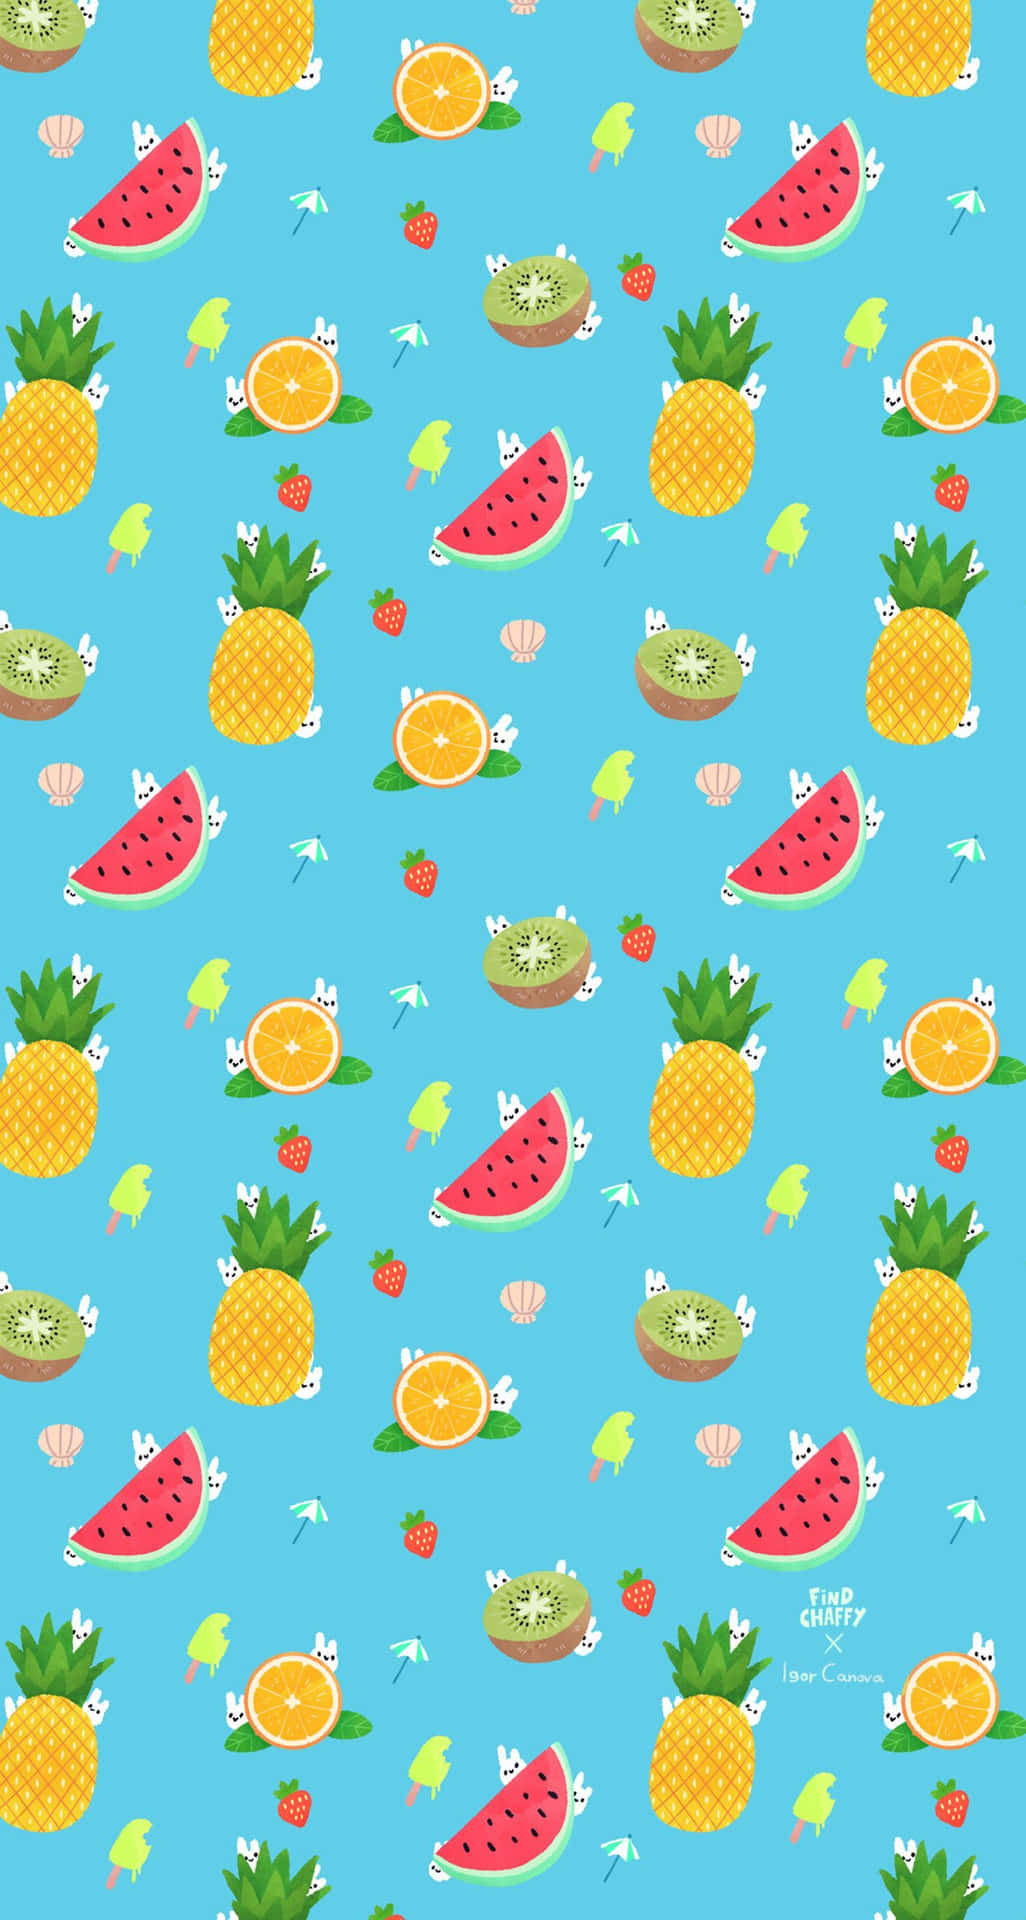 Summer Time Iphone With Colorful Fruits Wallpaper